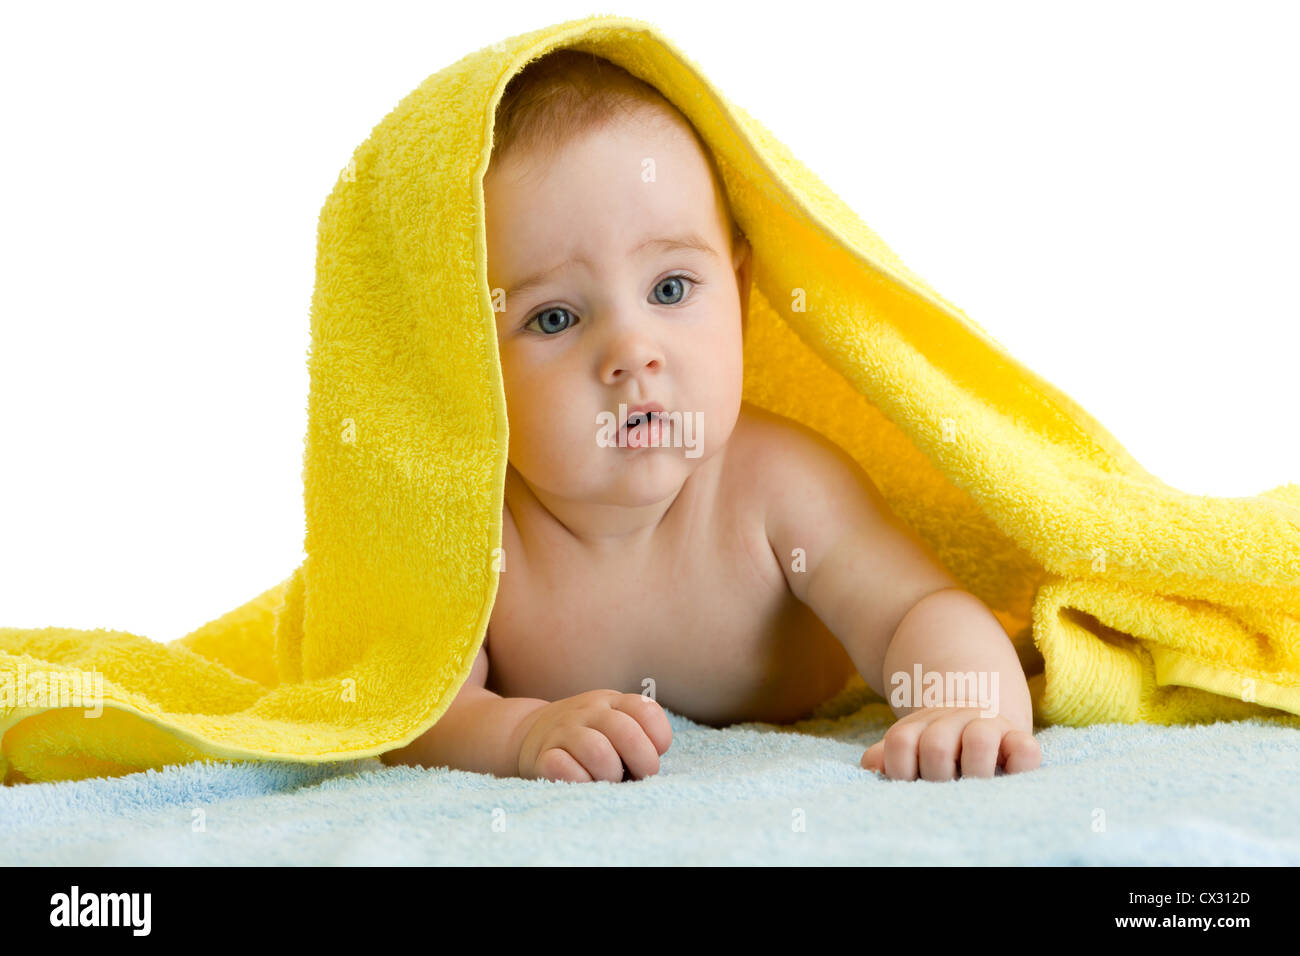 Adorable baby in colorful towel Stock Photo